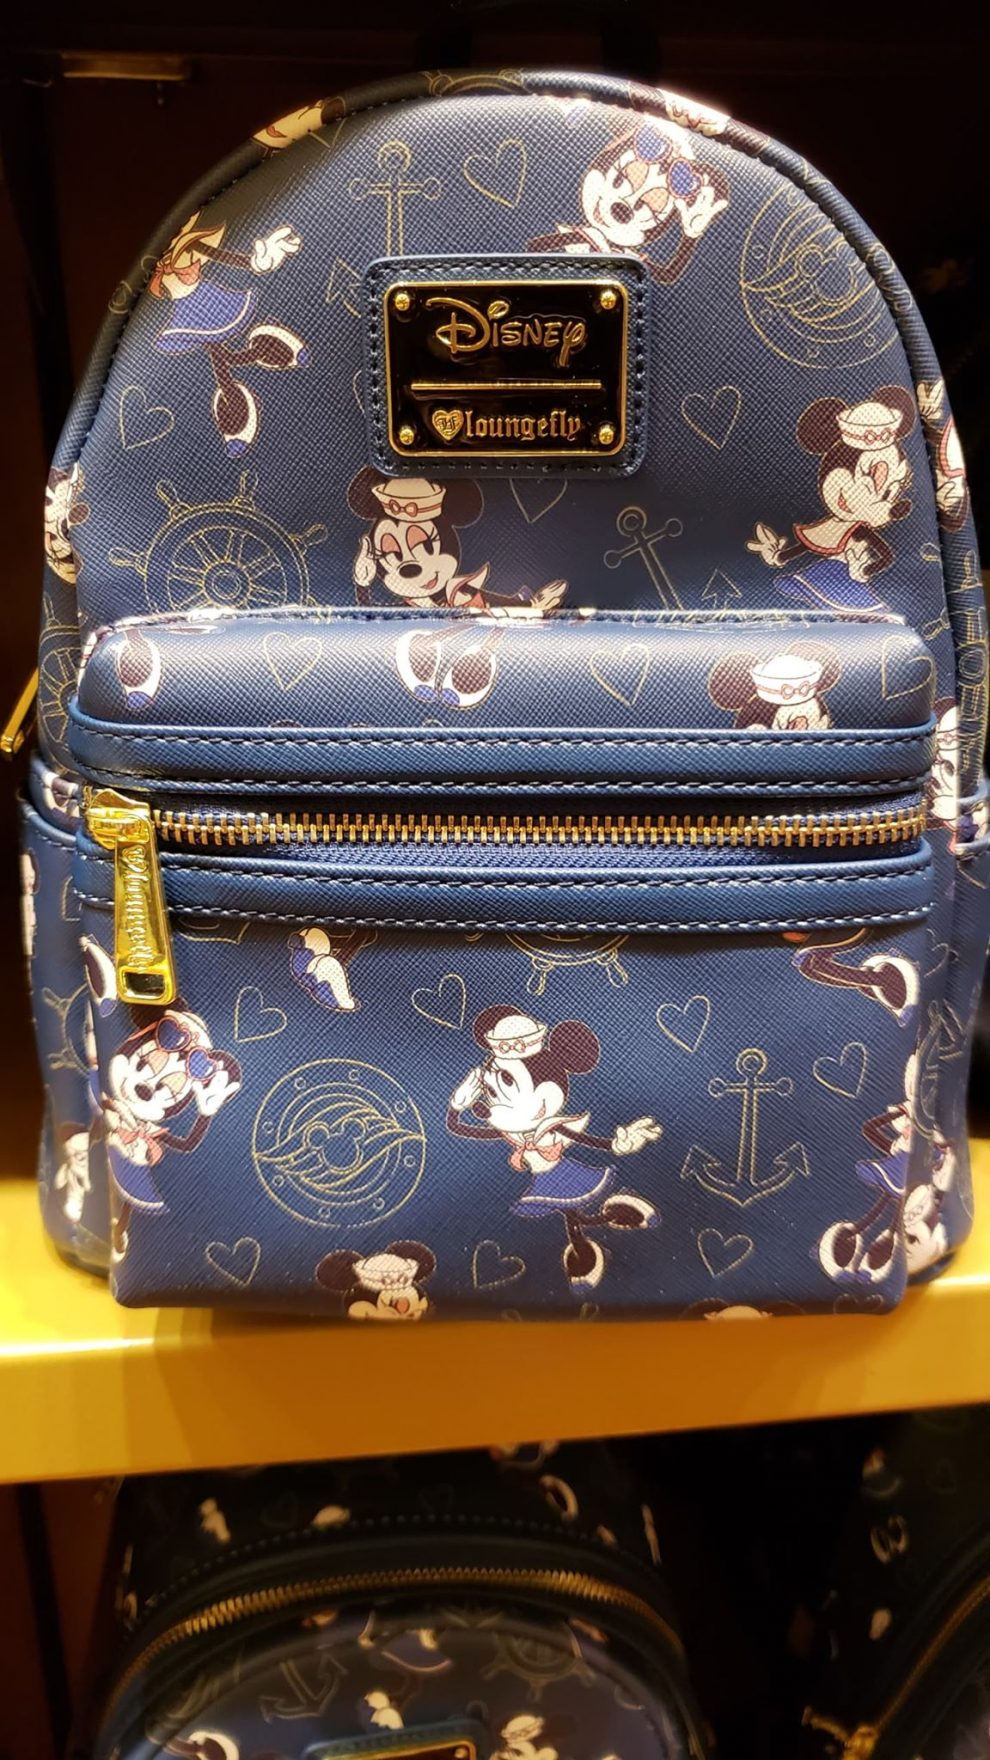 Set Sail With Disney Cruise Line Loungefly Accessories - Style